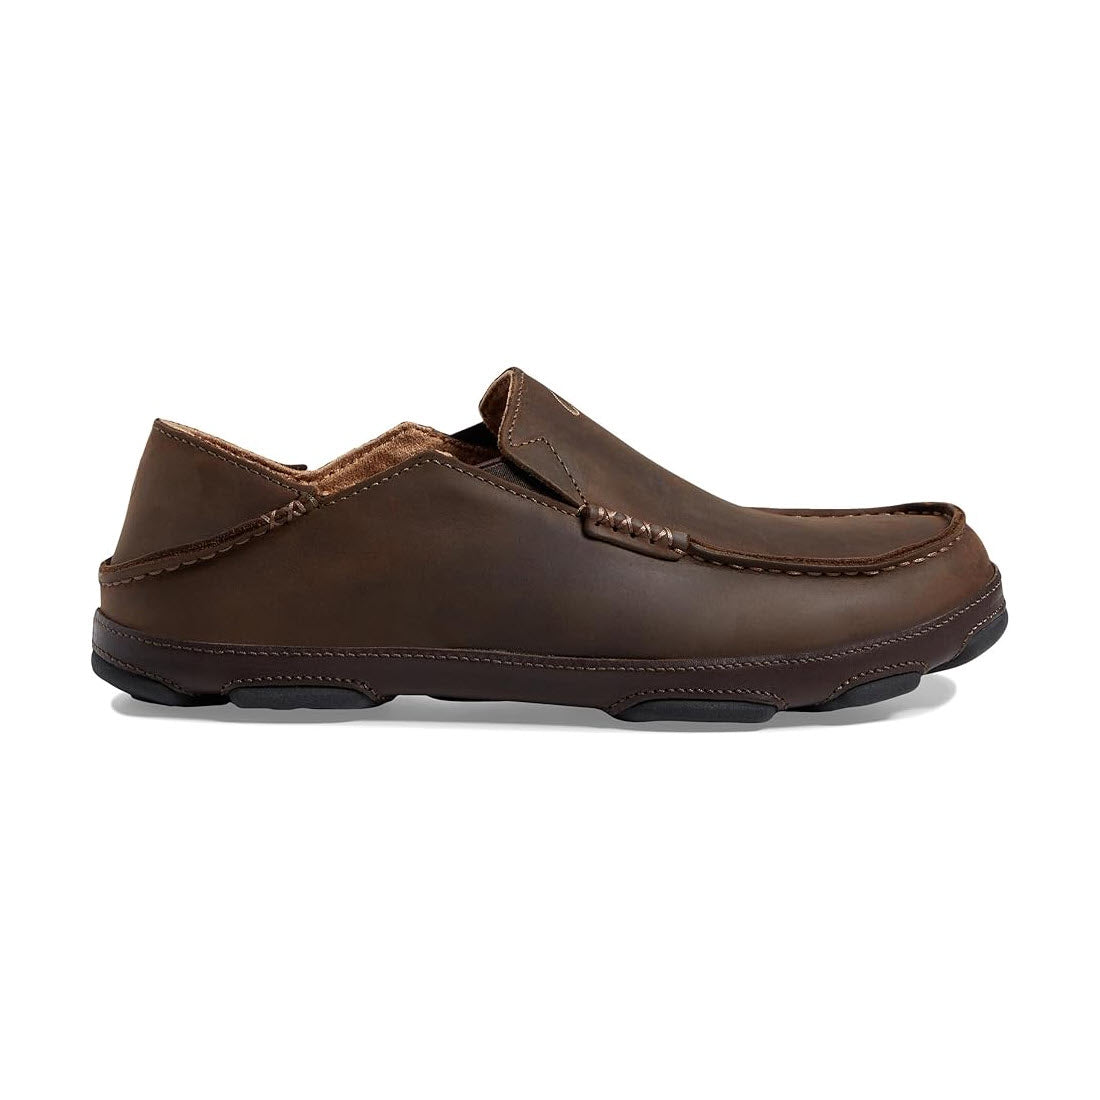 A single water-resistant leather casual men&#39;s Olukai Moloa slip-on shoe against a white background.